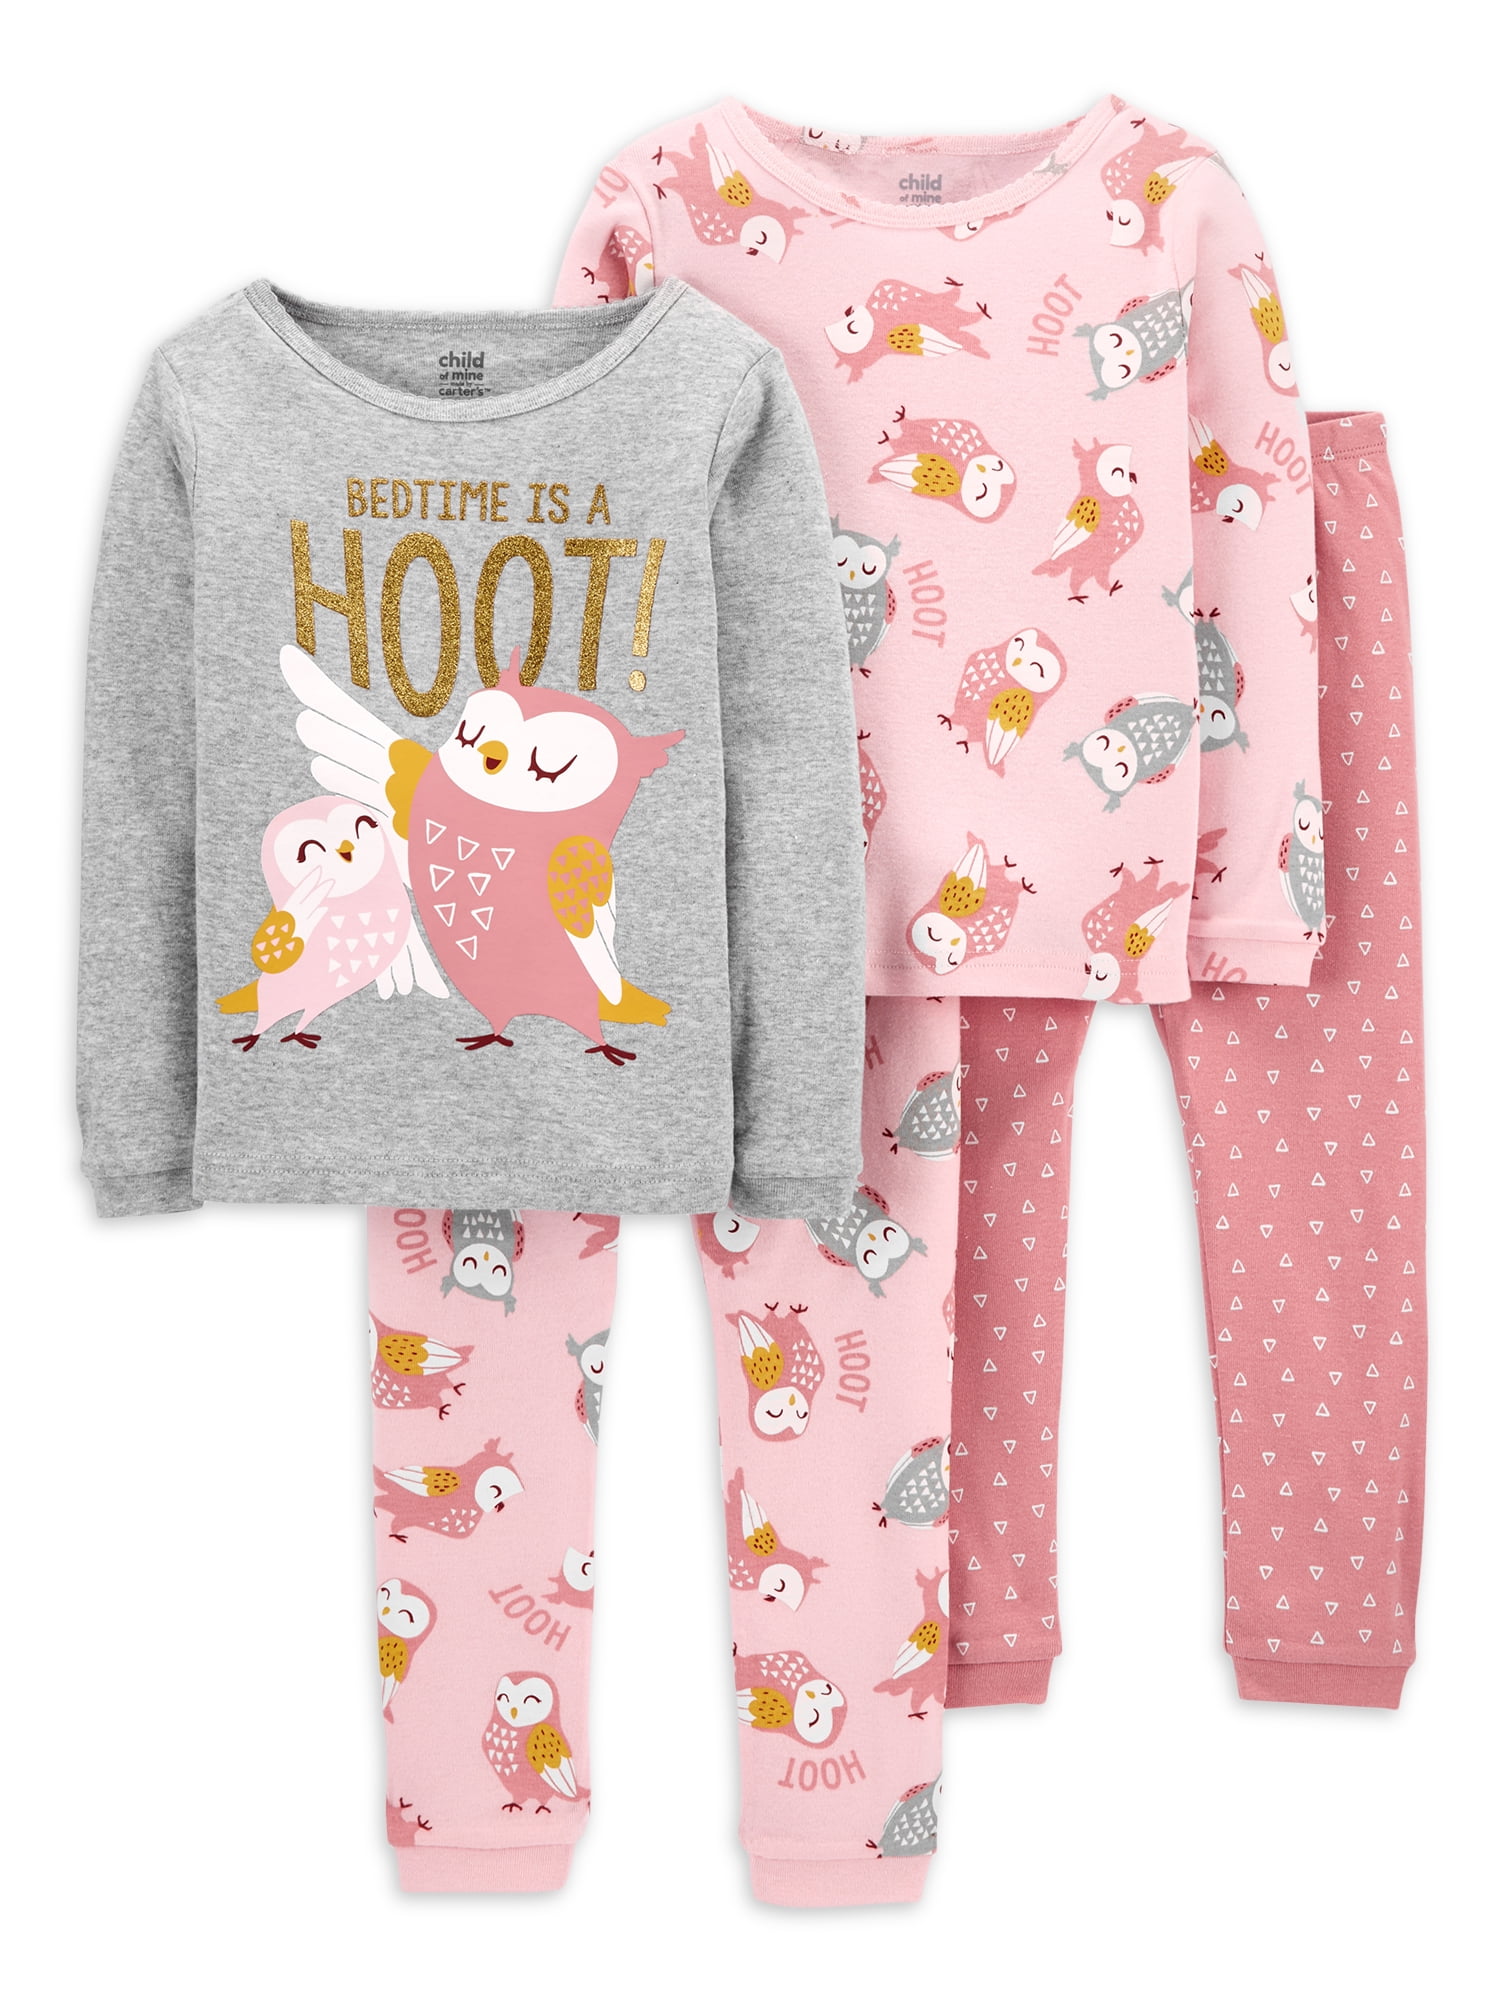 Details about   Carter's Girls 4T 2 piece Pajamas Long Sleeve Winking Heart on Top